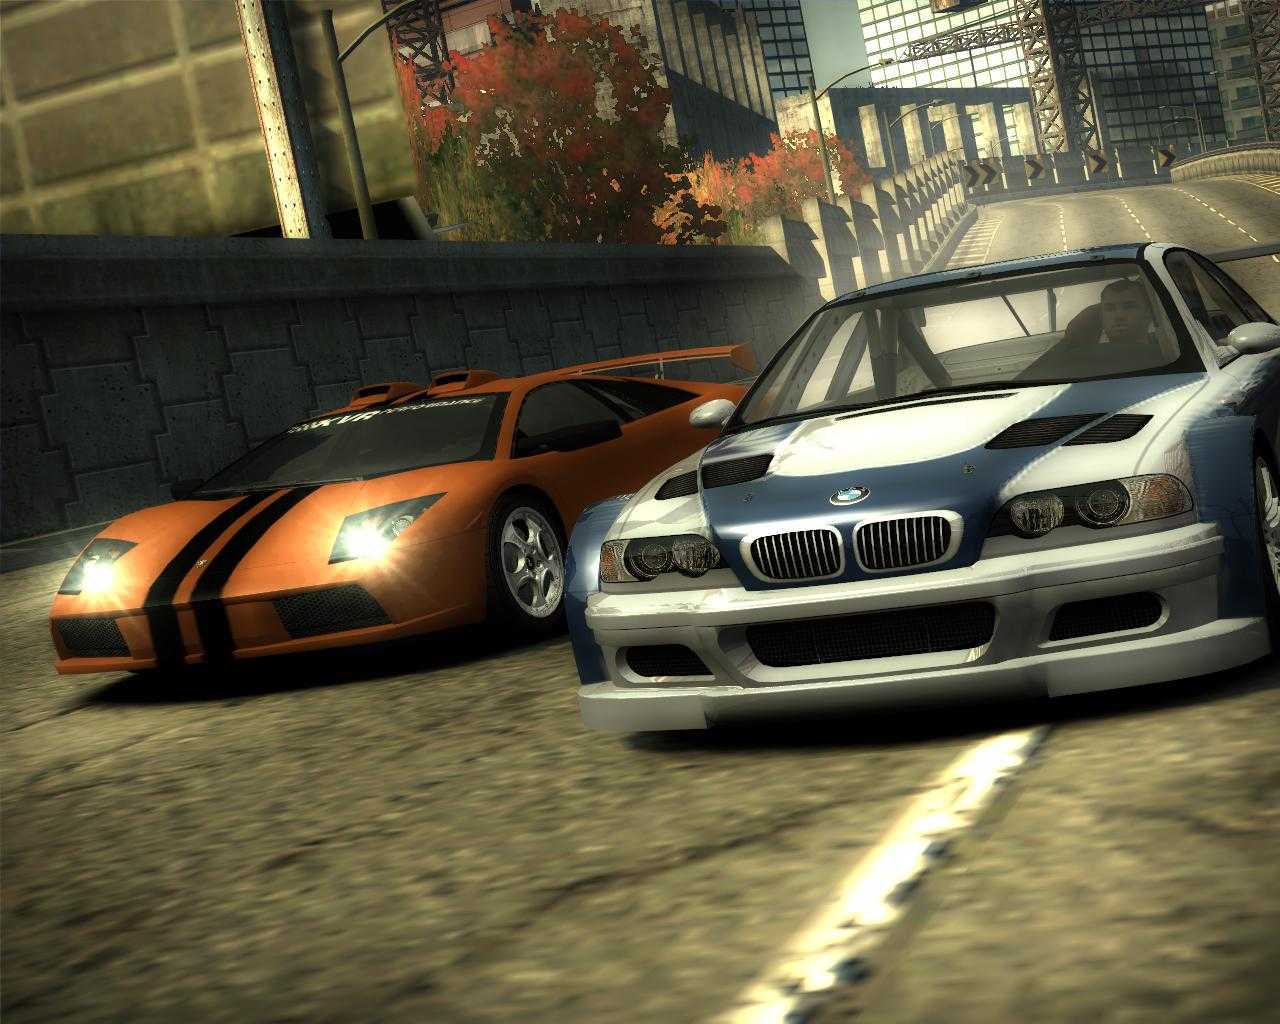 Nfs 2005 год. Нид фор СПИД most wanted 2005. Нфс мост вантед 2005. Гонки NFS most wanted. Need for Speed MW 2005.